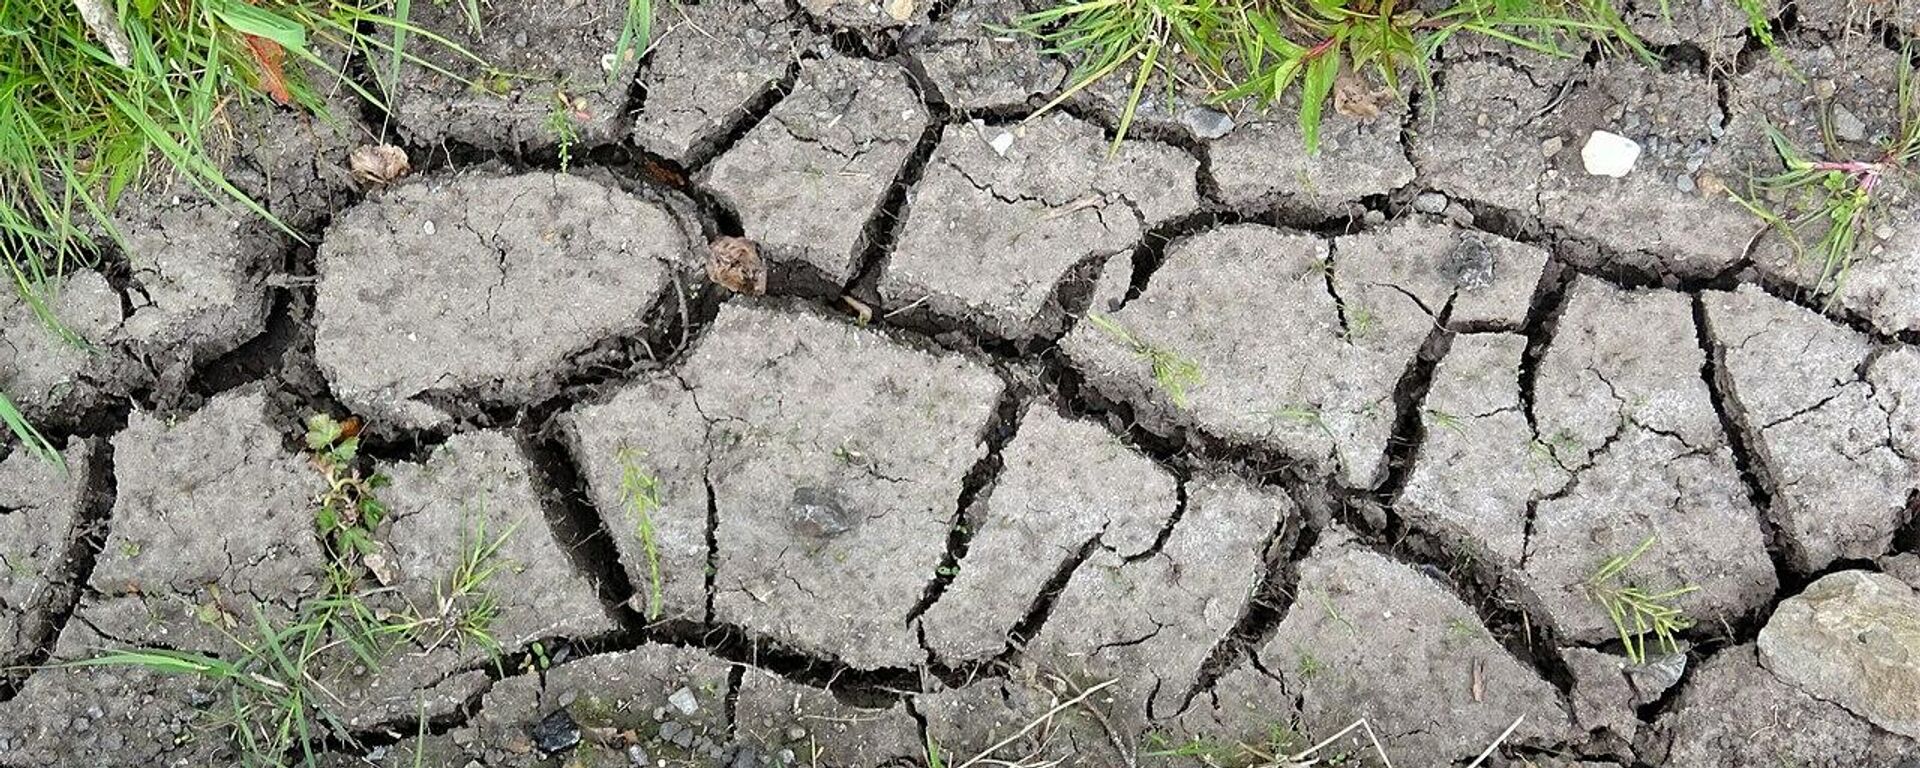 Cracked earth in a ditch after prolonged drought. 2020. Kilmaurs parish - Sputnik International, 1920, 19.10.2021